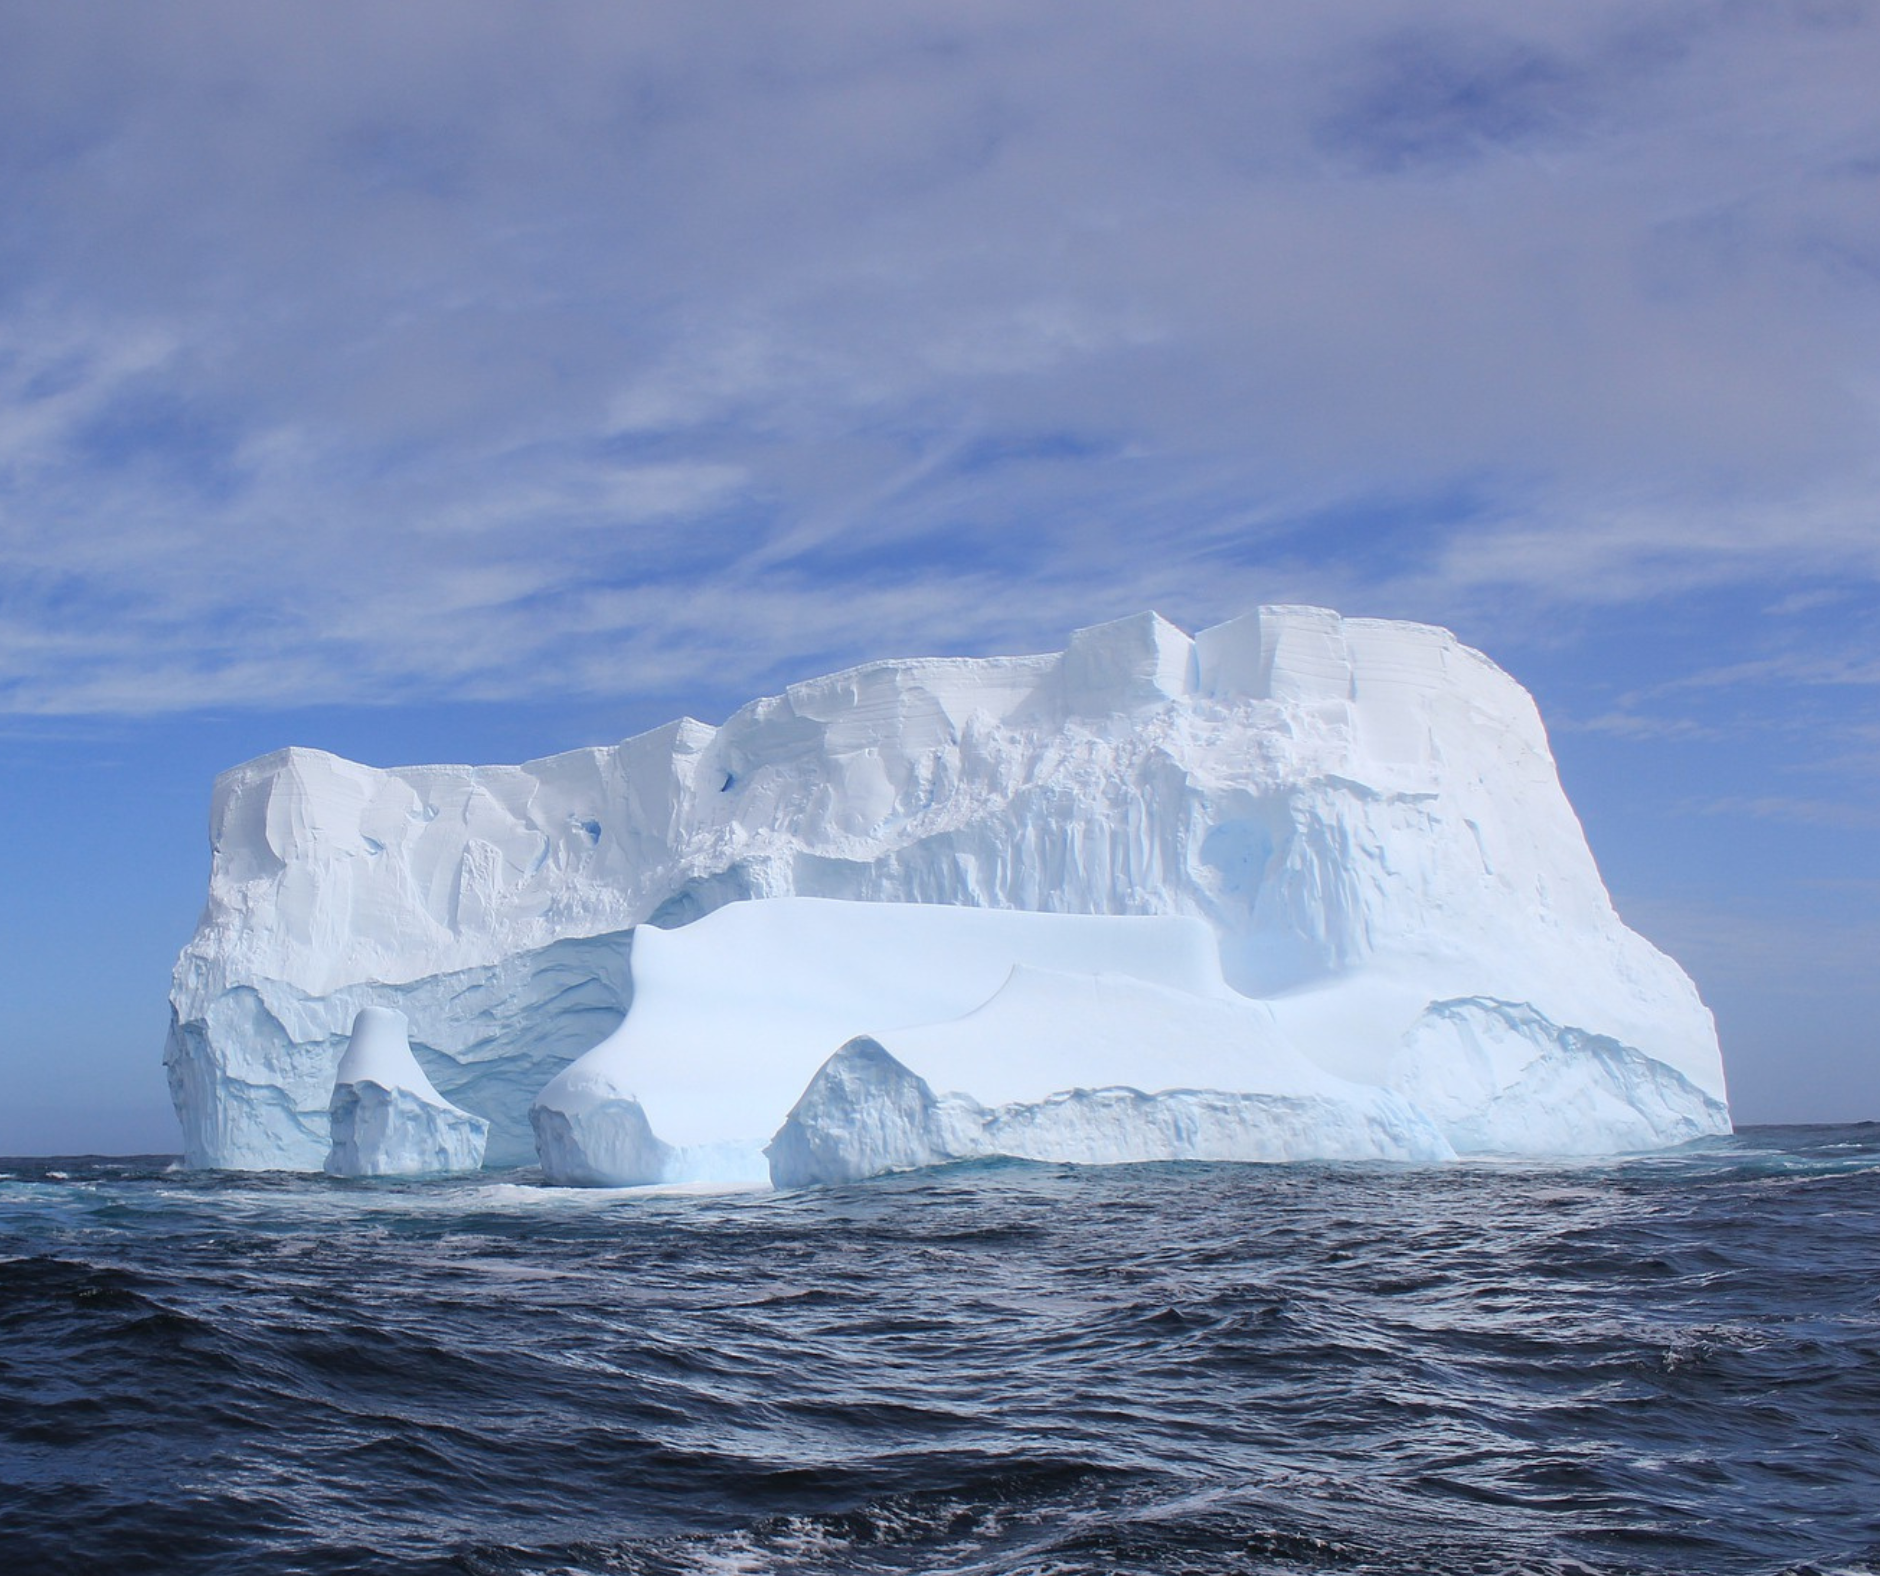 The Southern Ocean absorbs more heat than any other ocean on Earth, and the impacts will be felt for generations